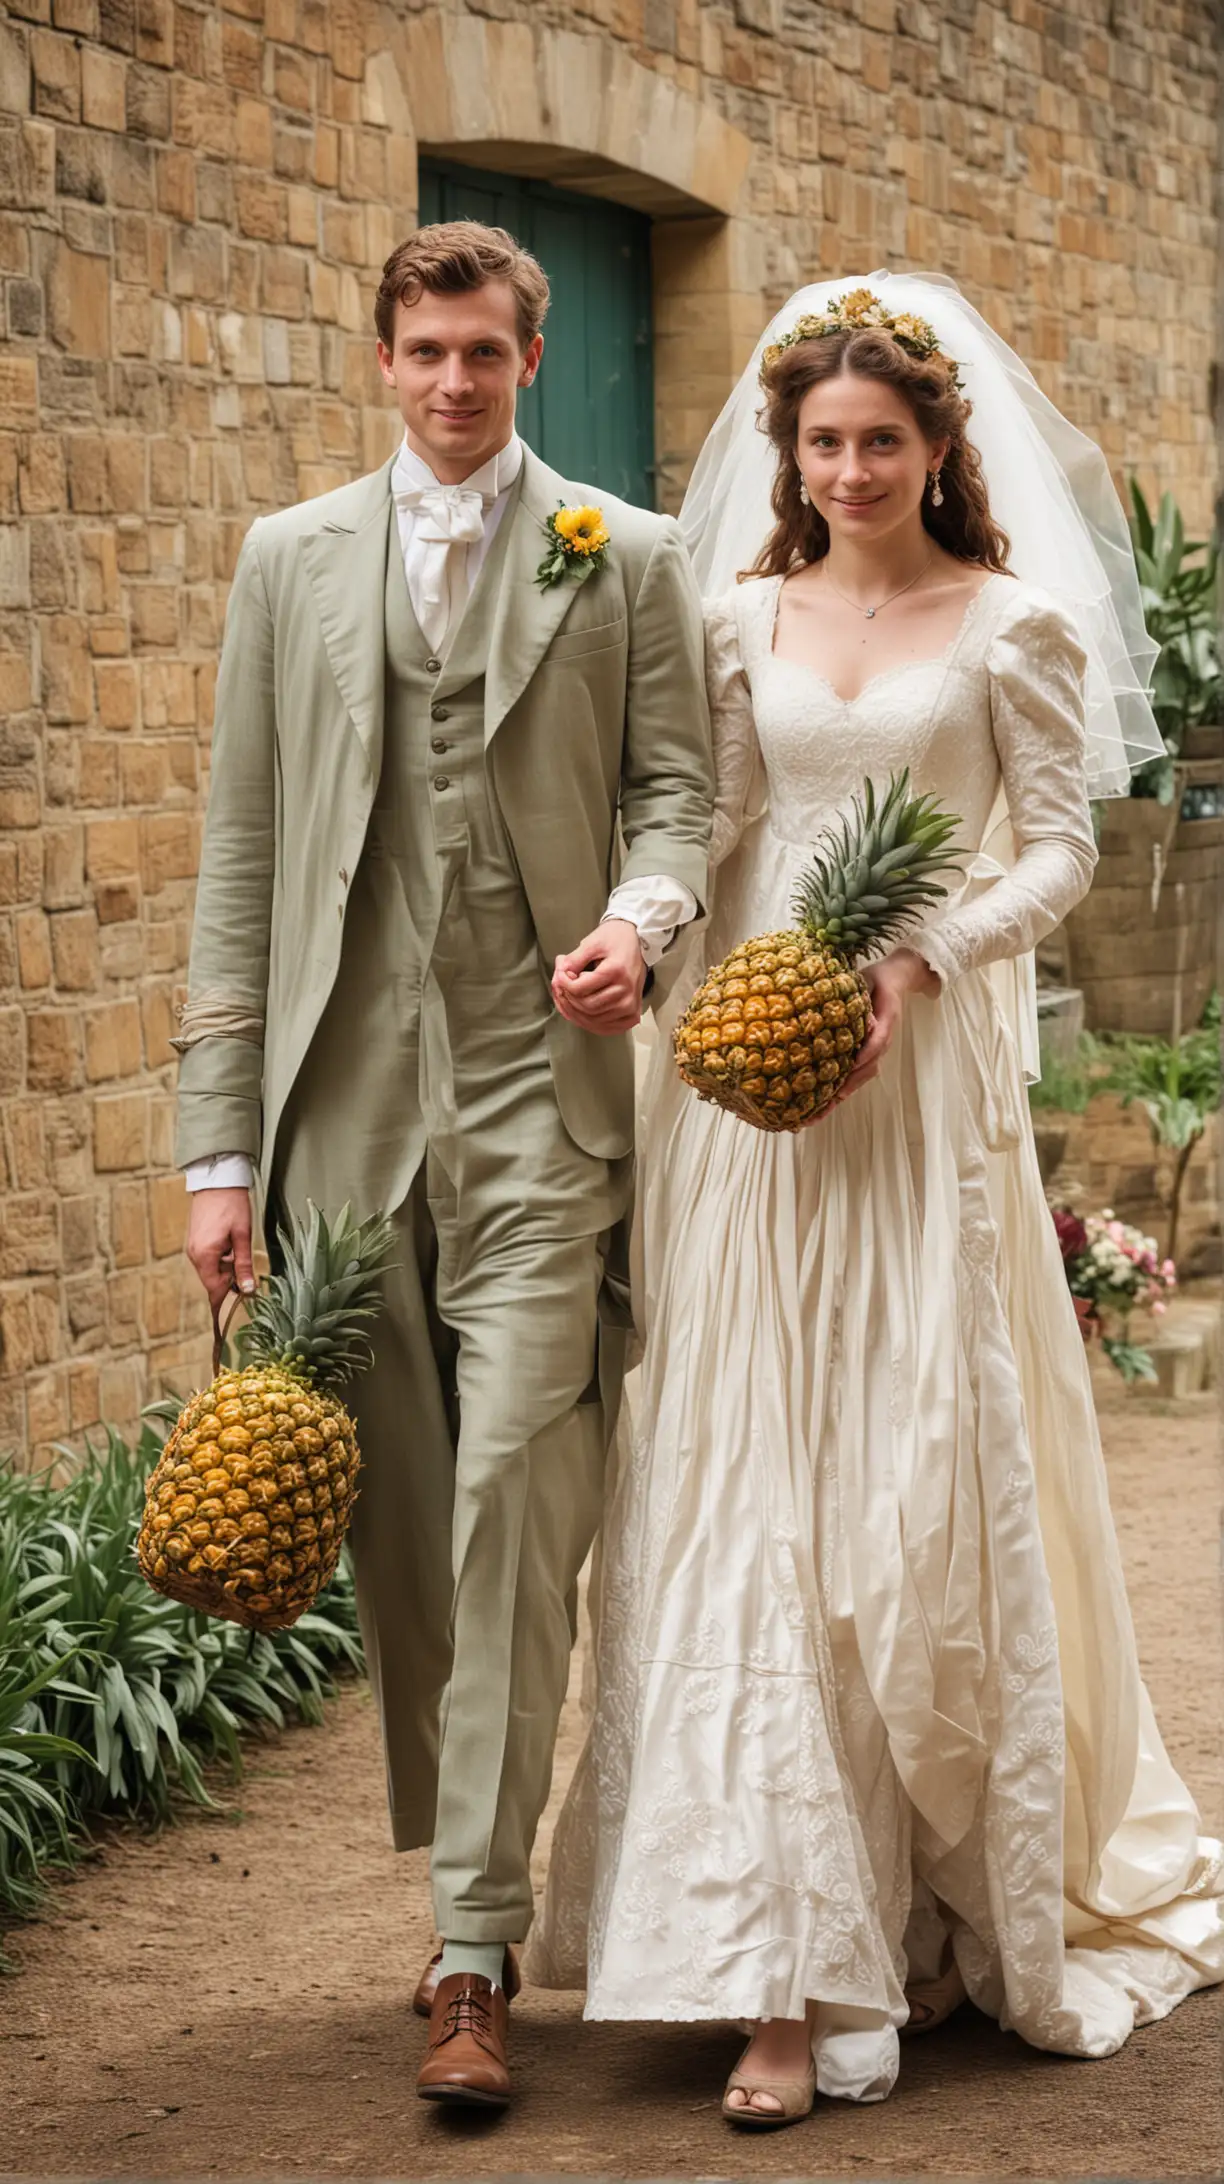 Bride and groom at a wedding in 18th-century England carrying pineapples.